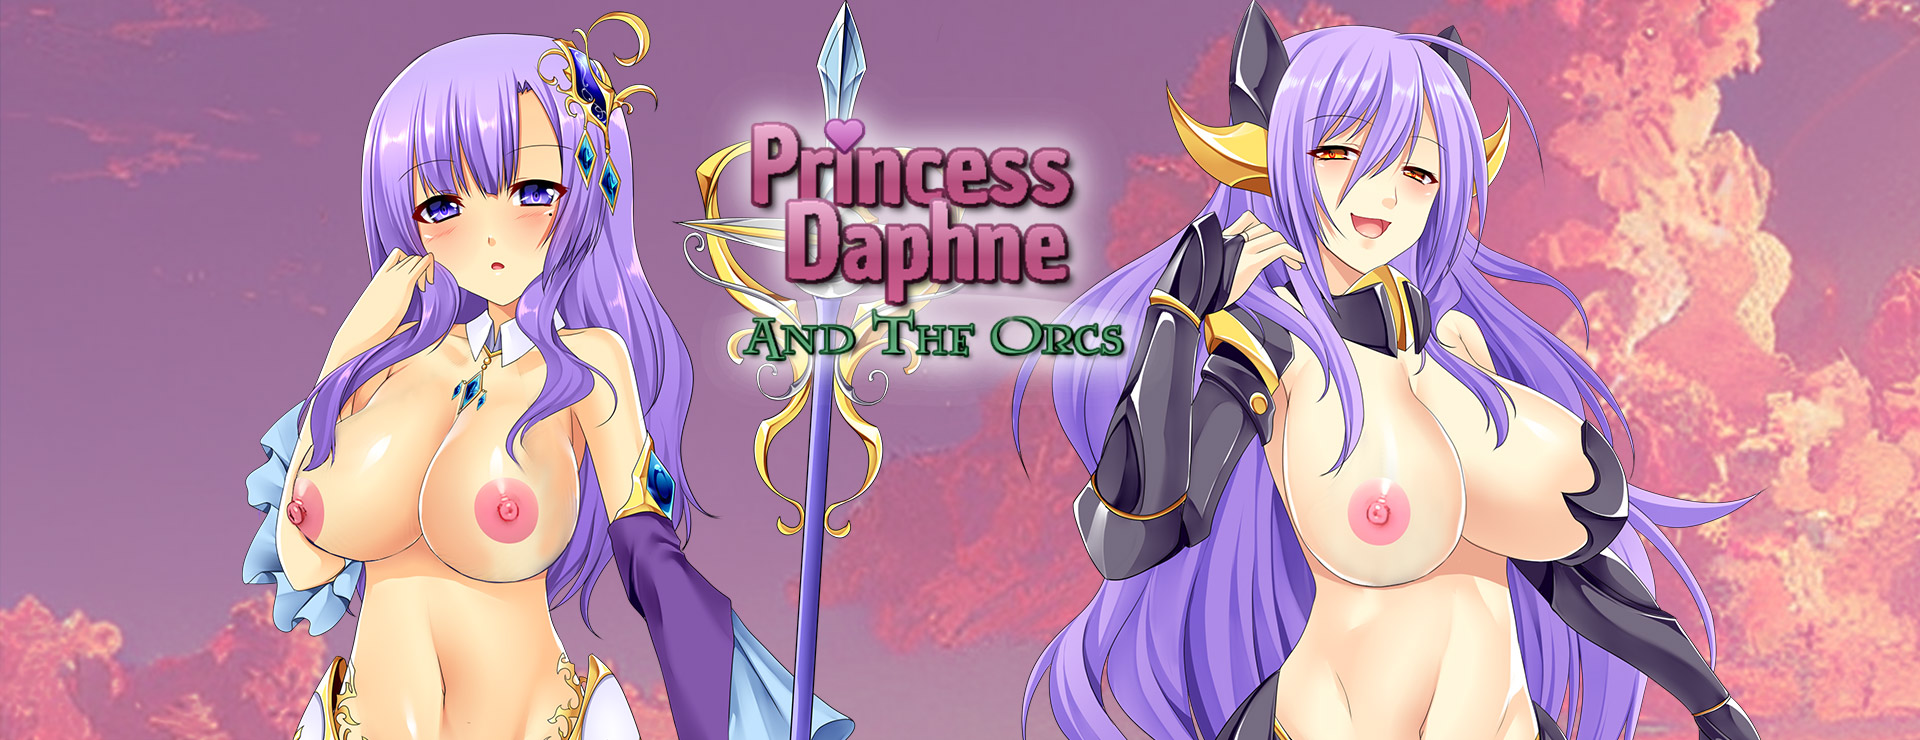 Princess Daphne and the Orcs - 角色扮演 遊戲